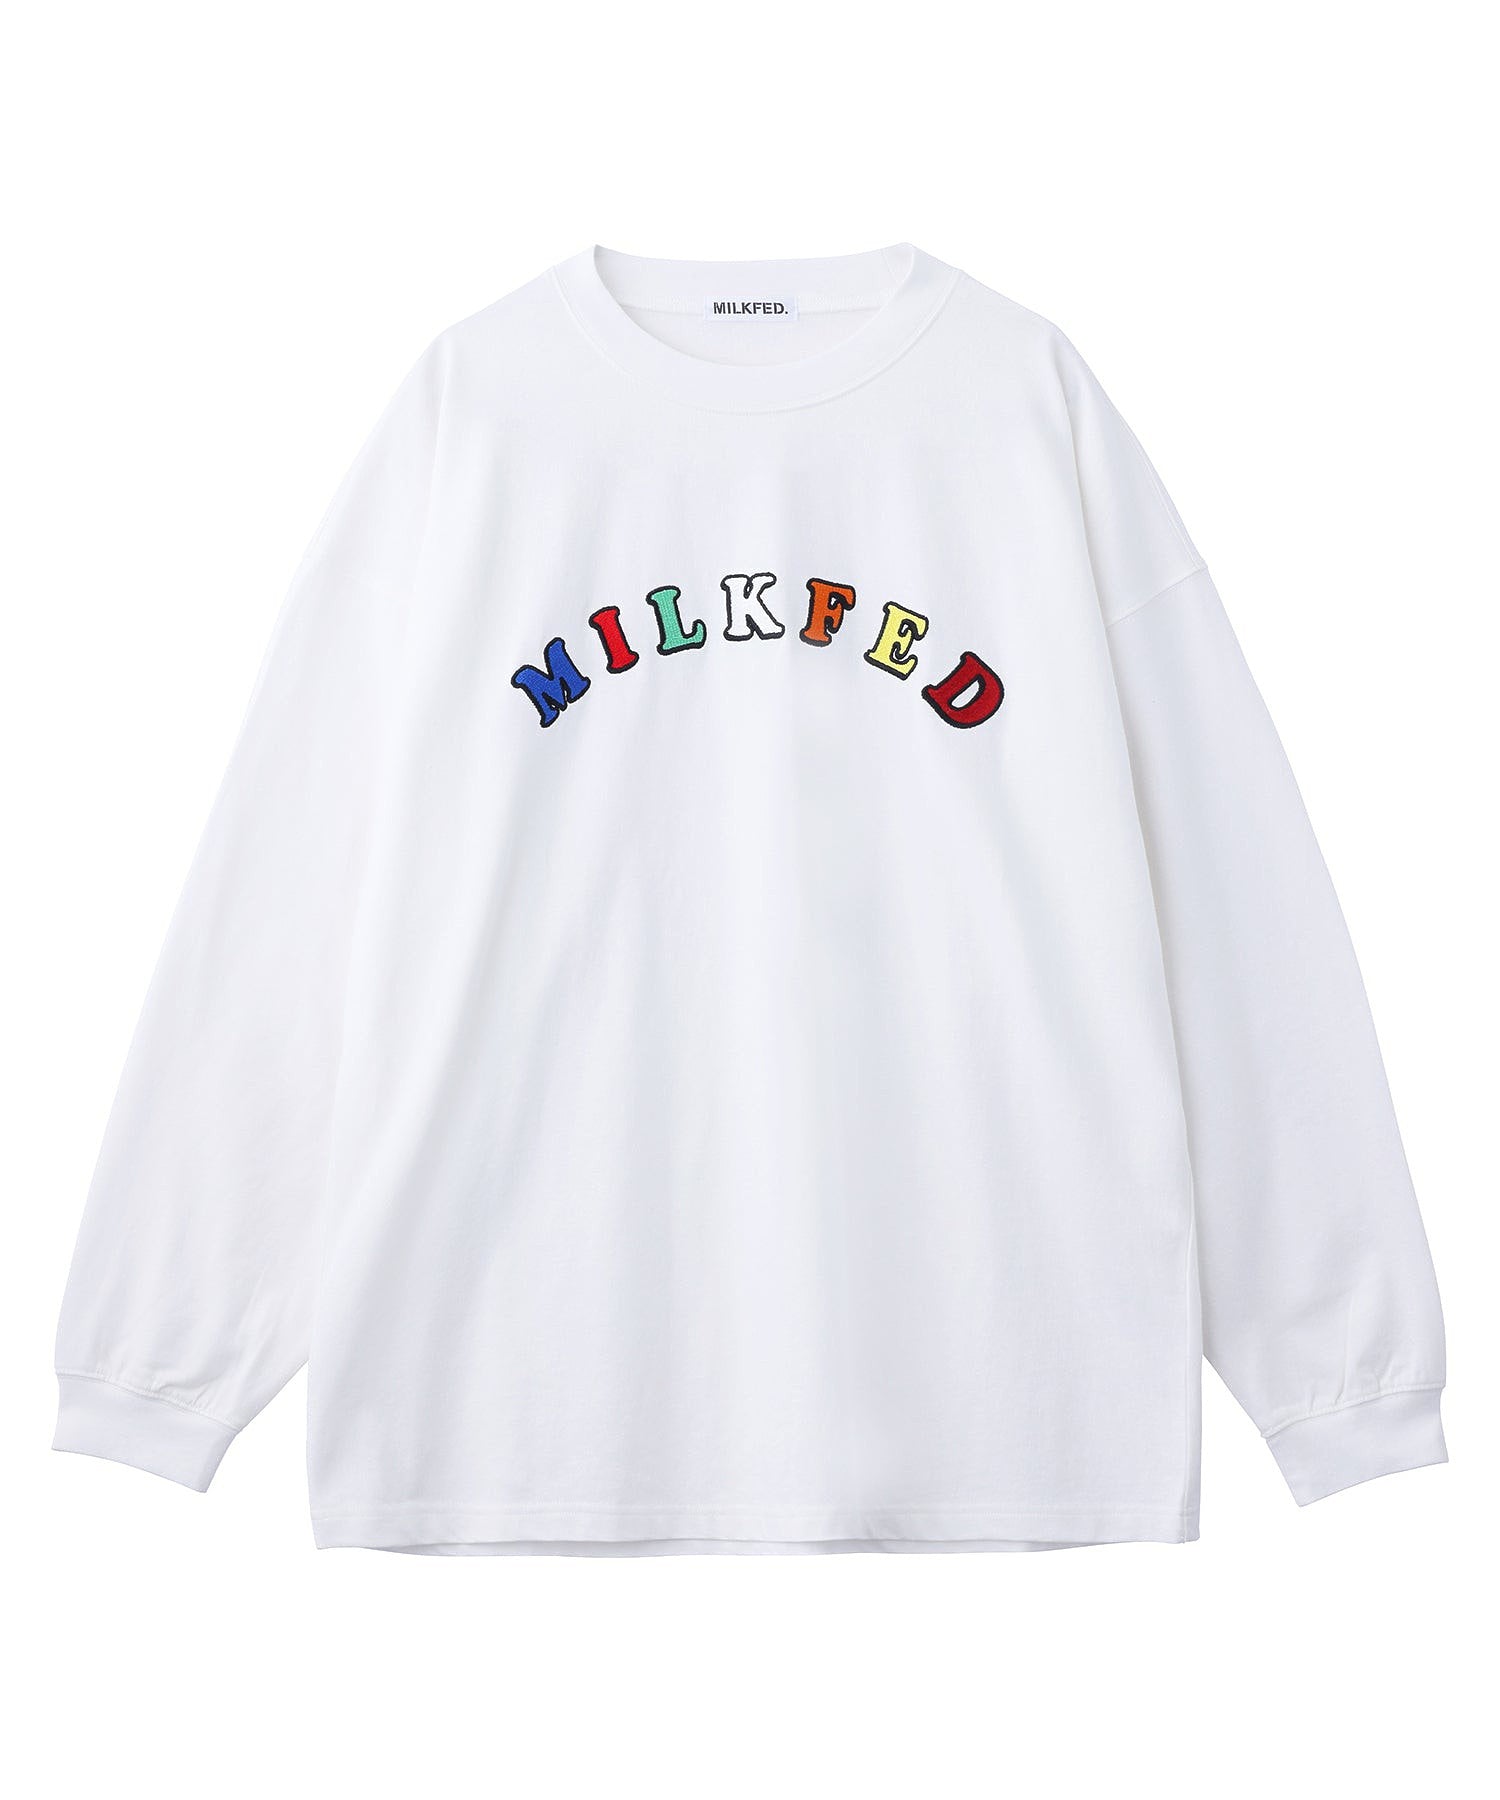 EMBROIDERYED ARCH LOGO L/S TOP MILKFED.